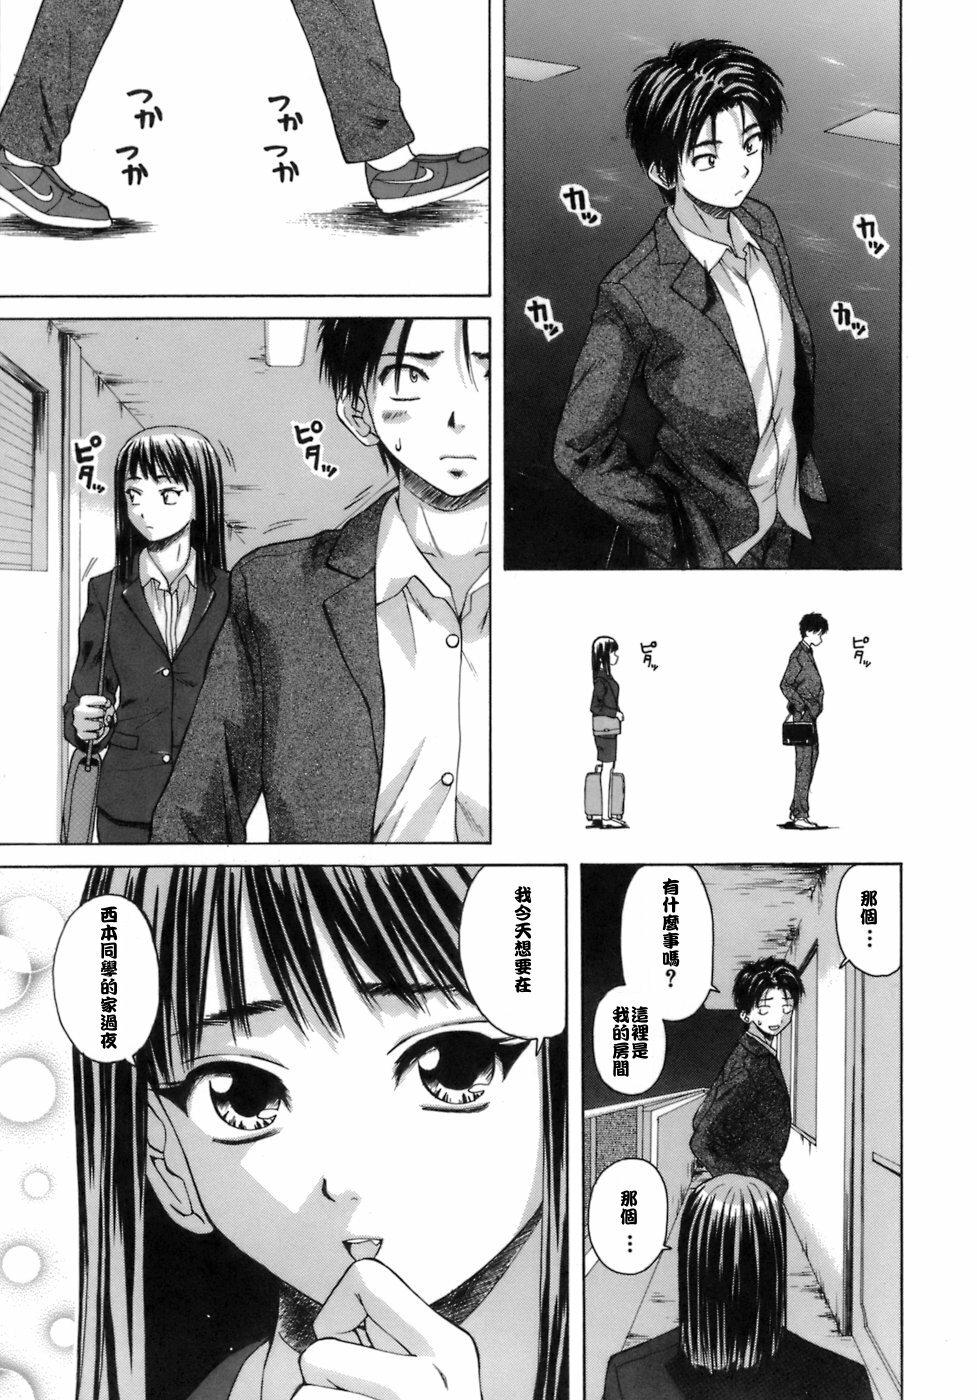 [Fuuga] Kyoushi to Seito to - Teacher and Student [Chinese] [悠月工房] page 10 full